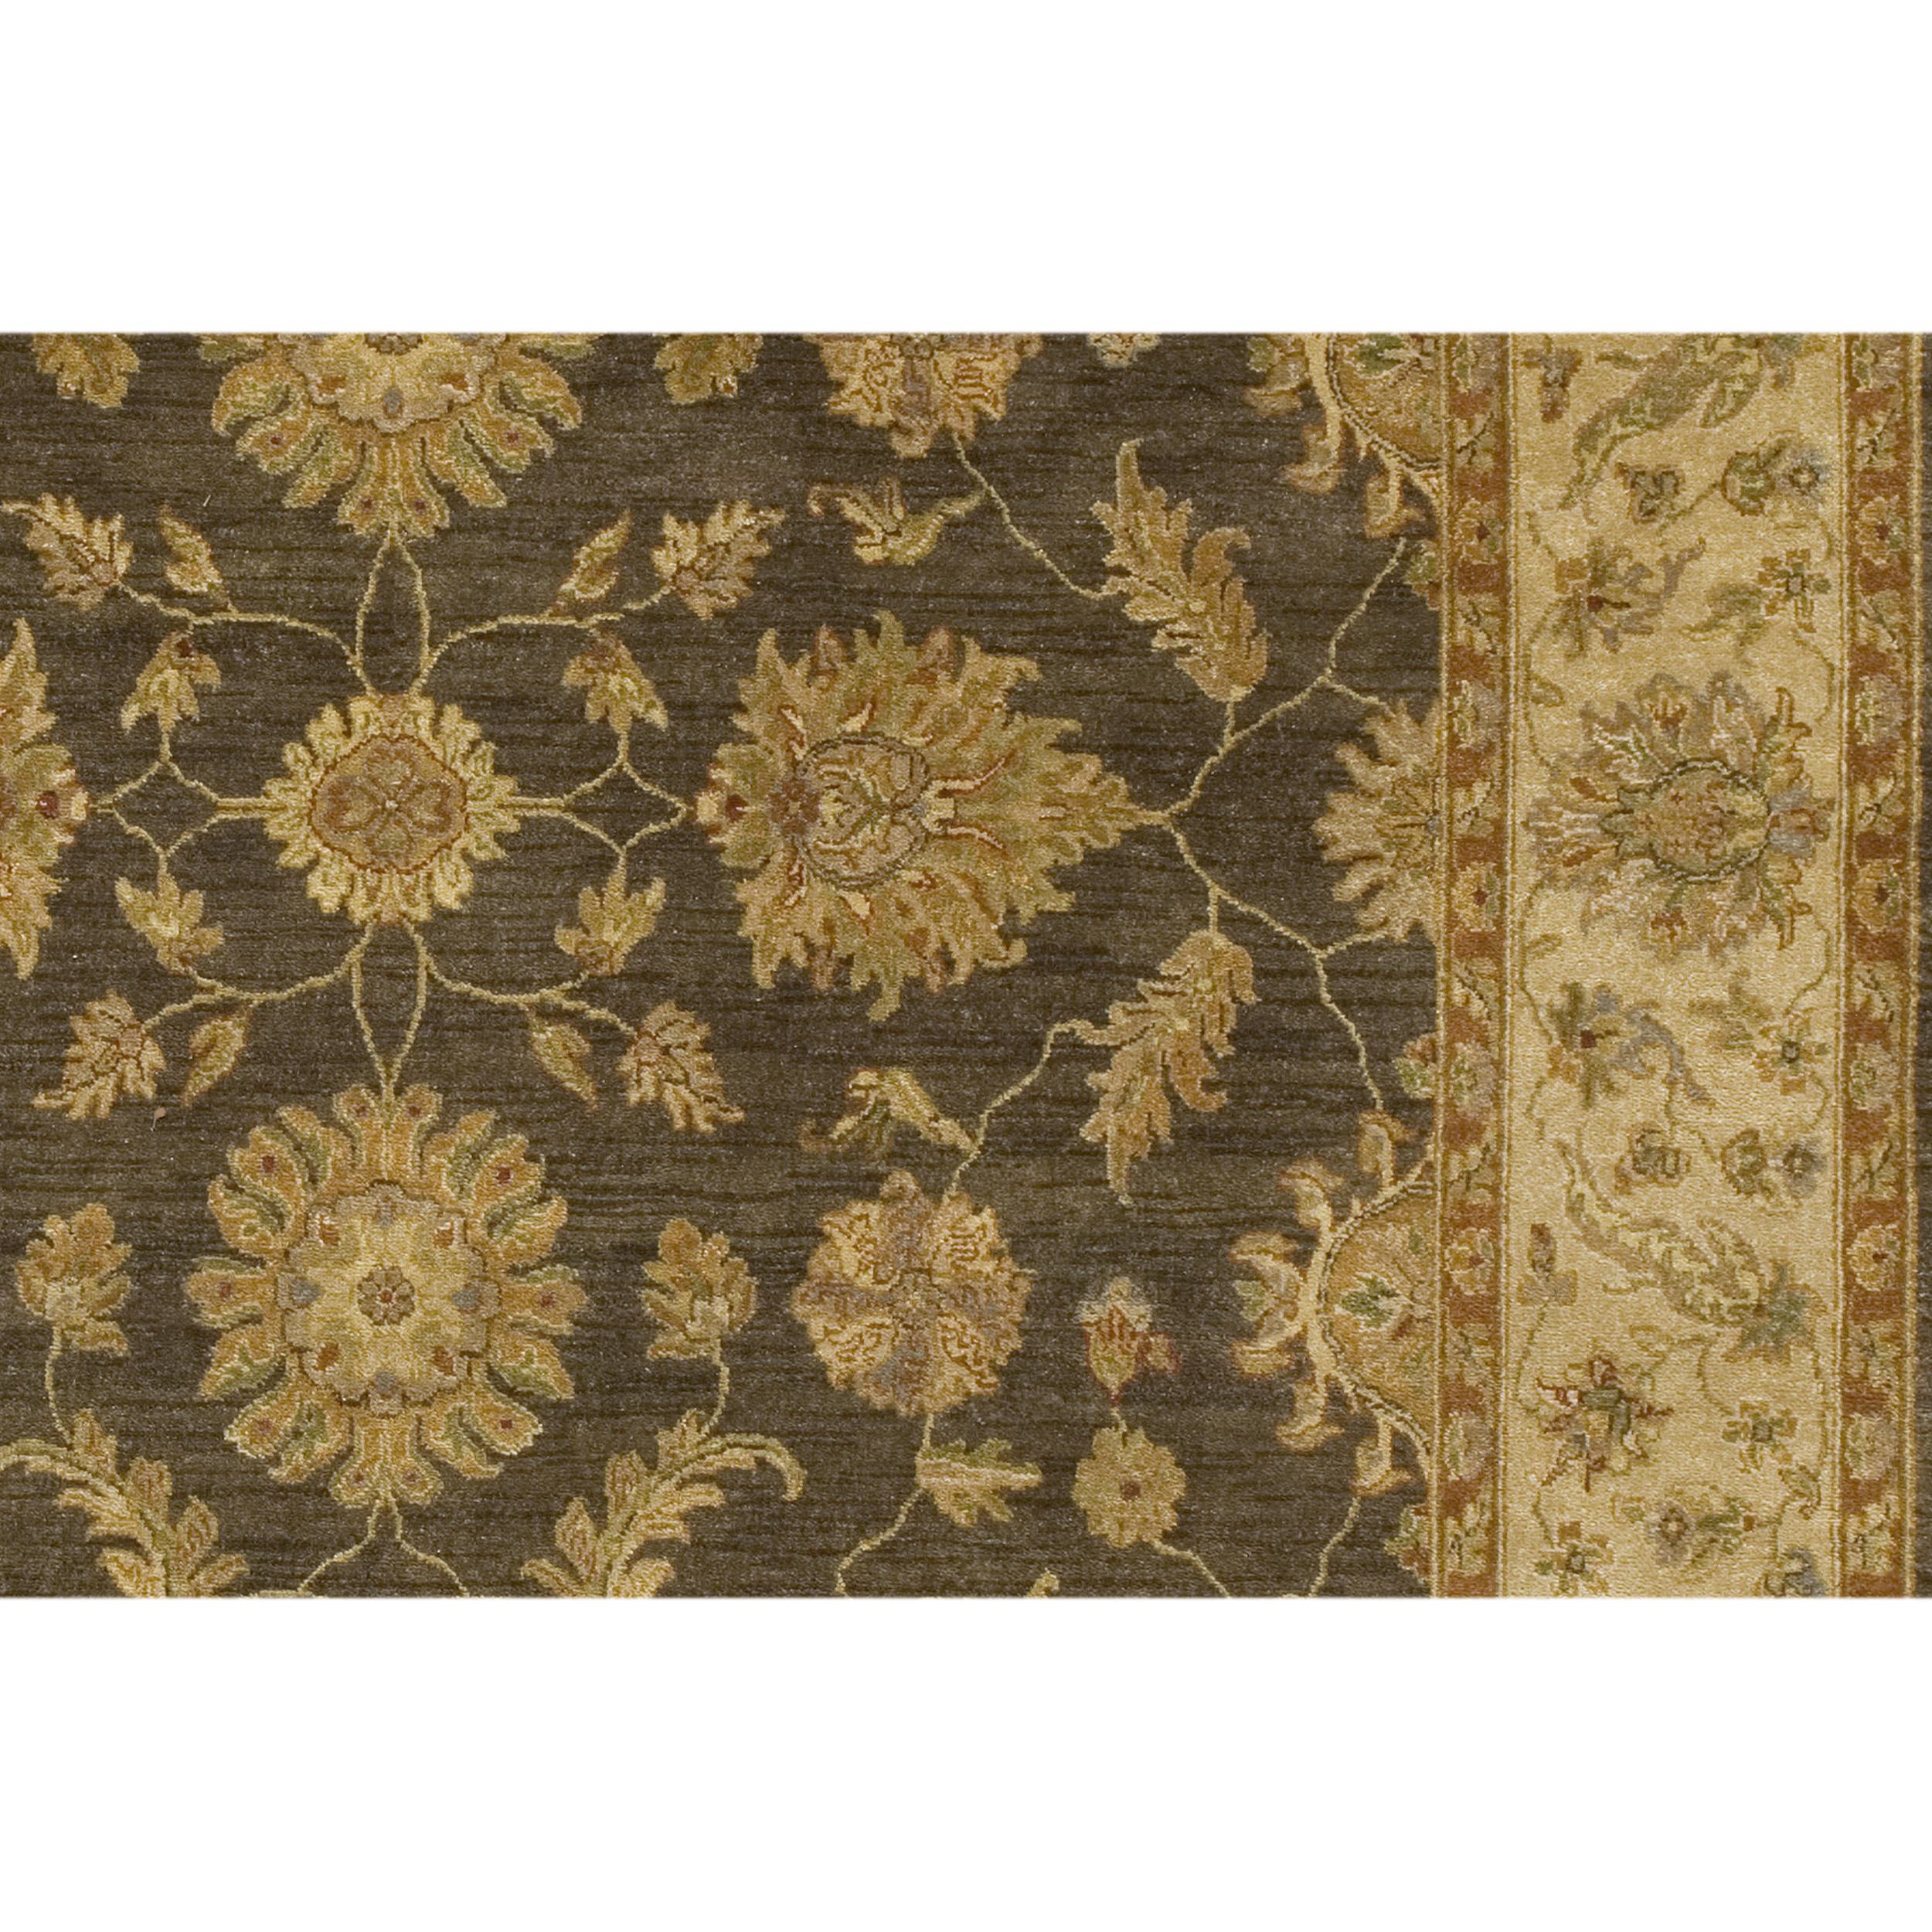 Indian Luxury Traditional Hand-Knotted Amritsar Ziegler Brown/Beige 12x24 Rug For Sale